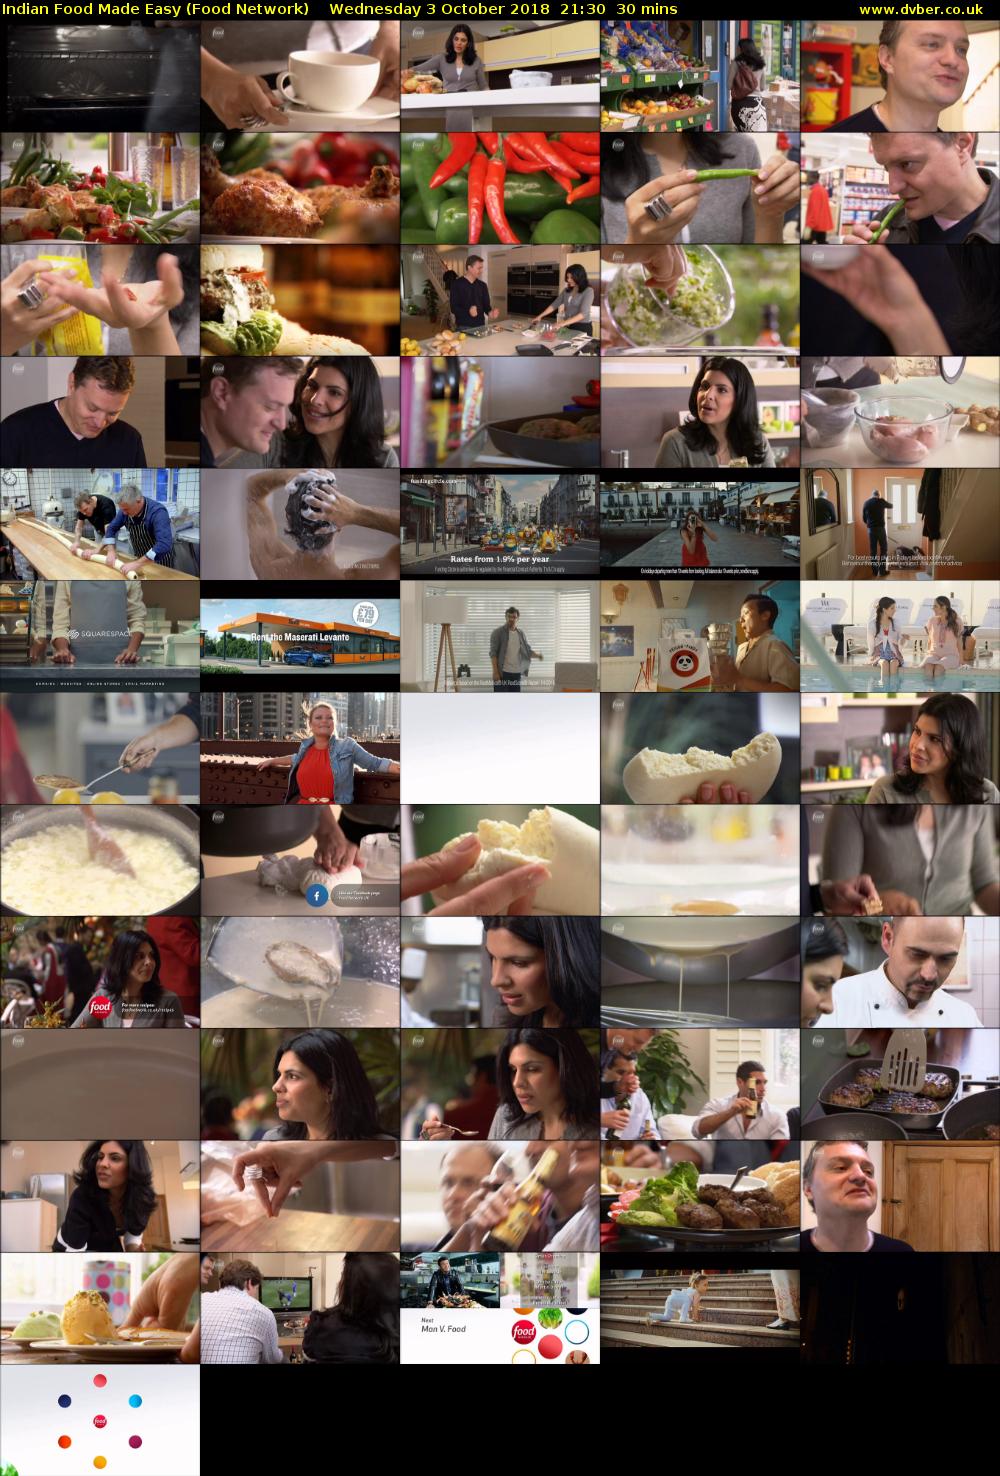 Indian Food Made Easy (Food Network) Wednesday 3 October 2018 21:30 - 22:00